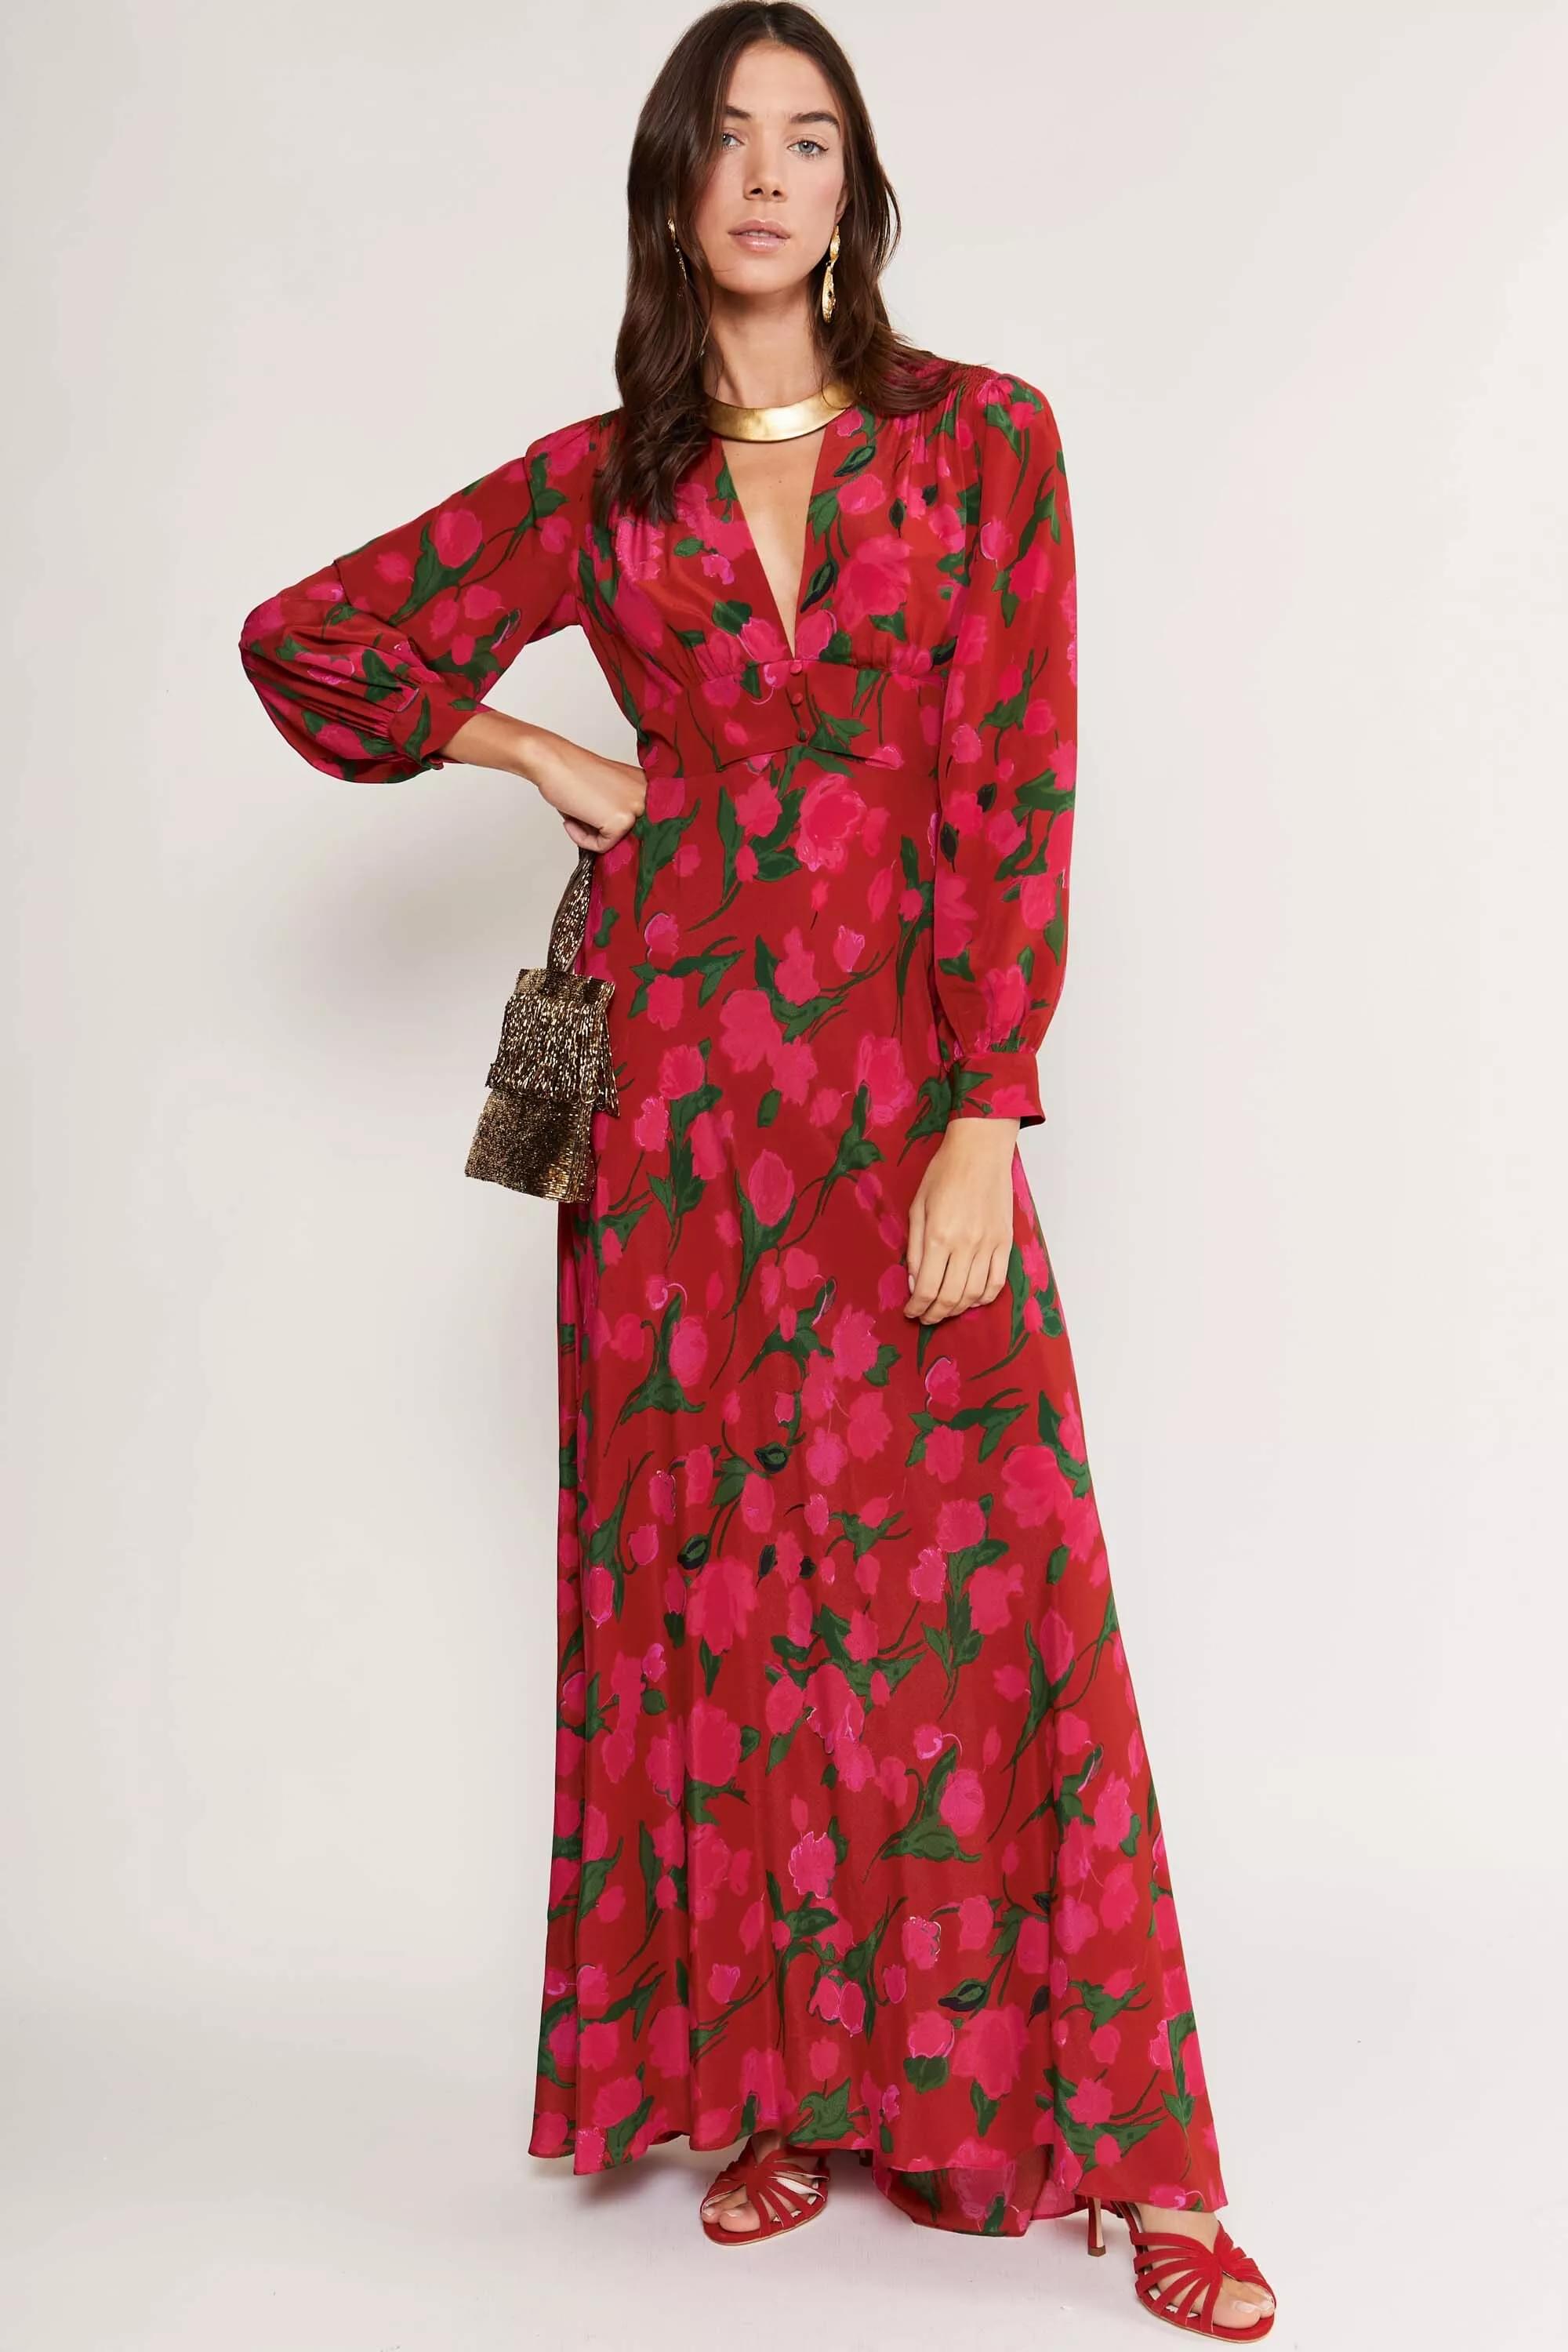 Emory in Fontainhas Floral Red